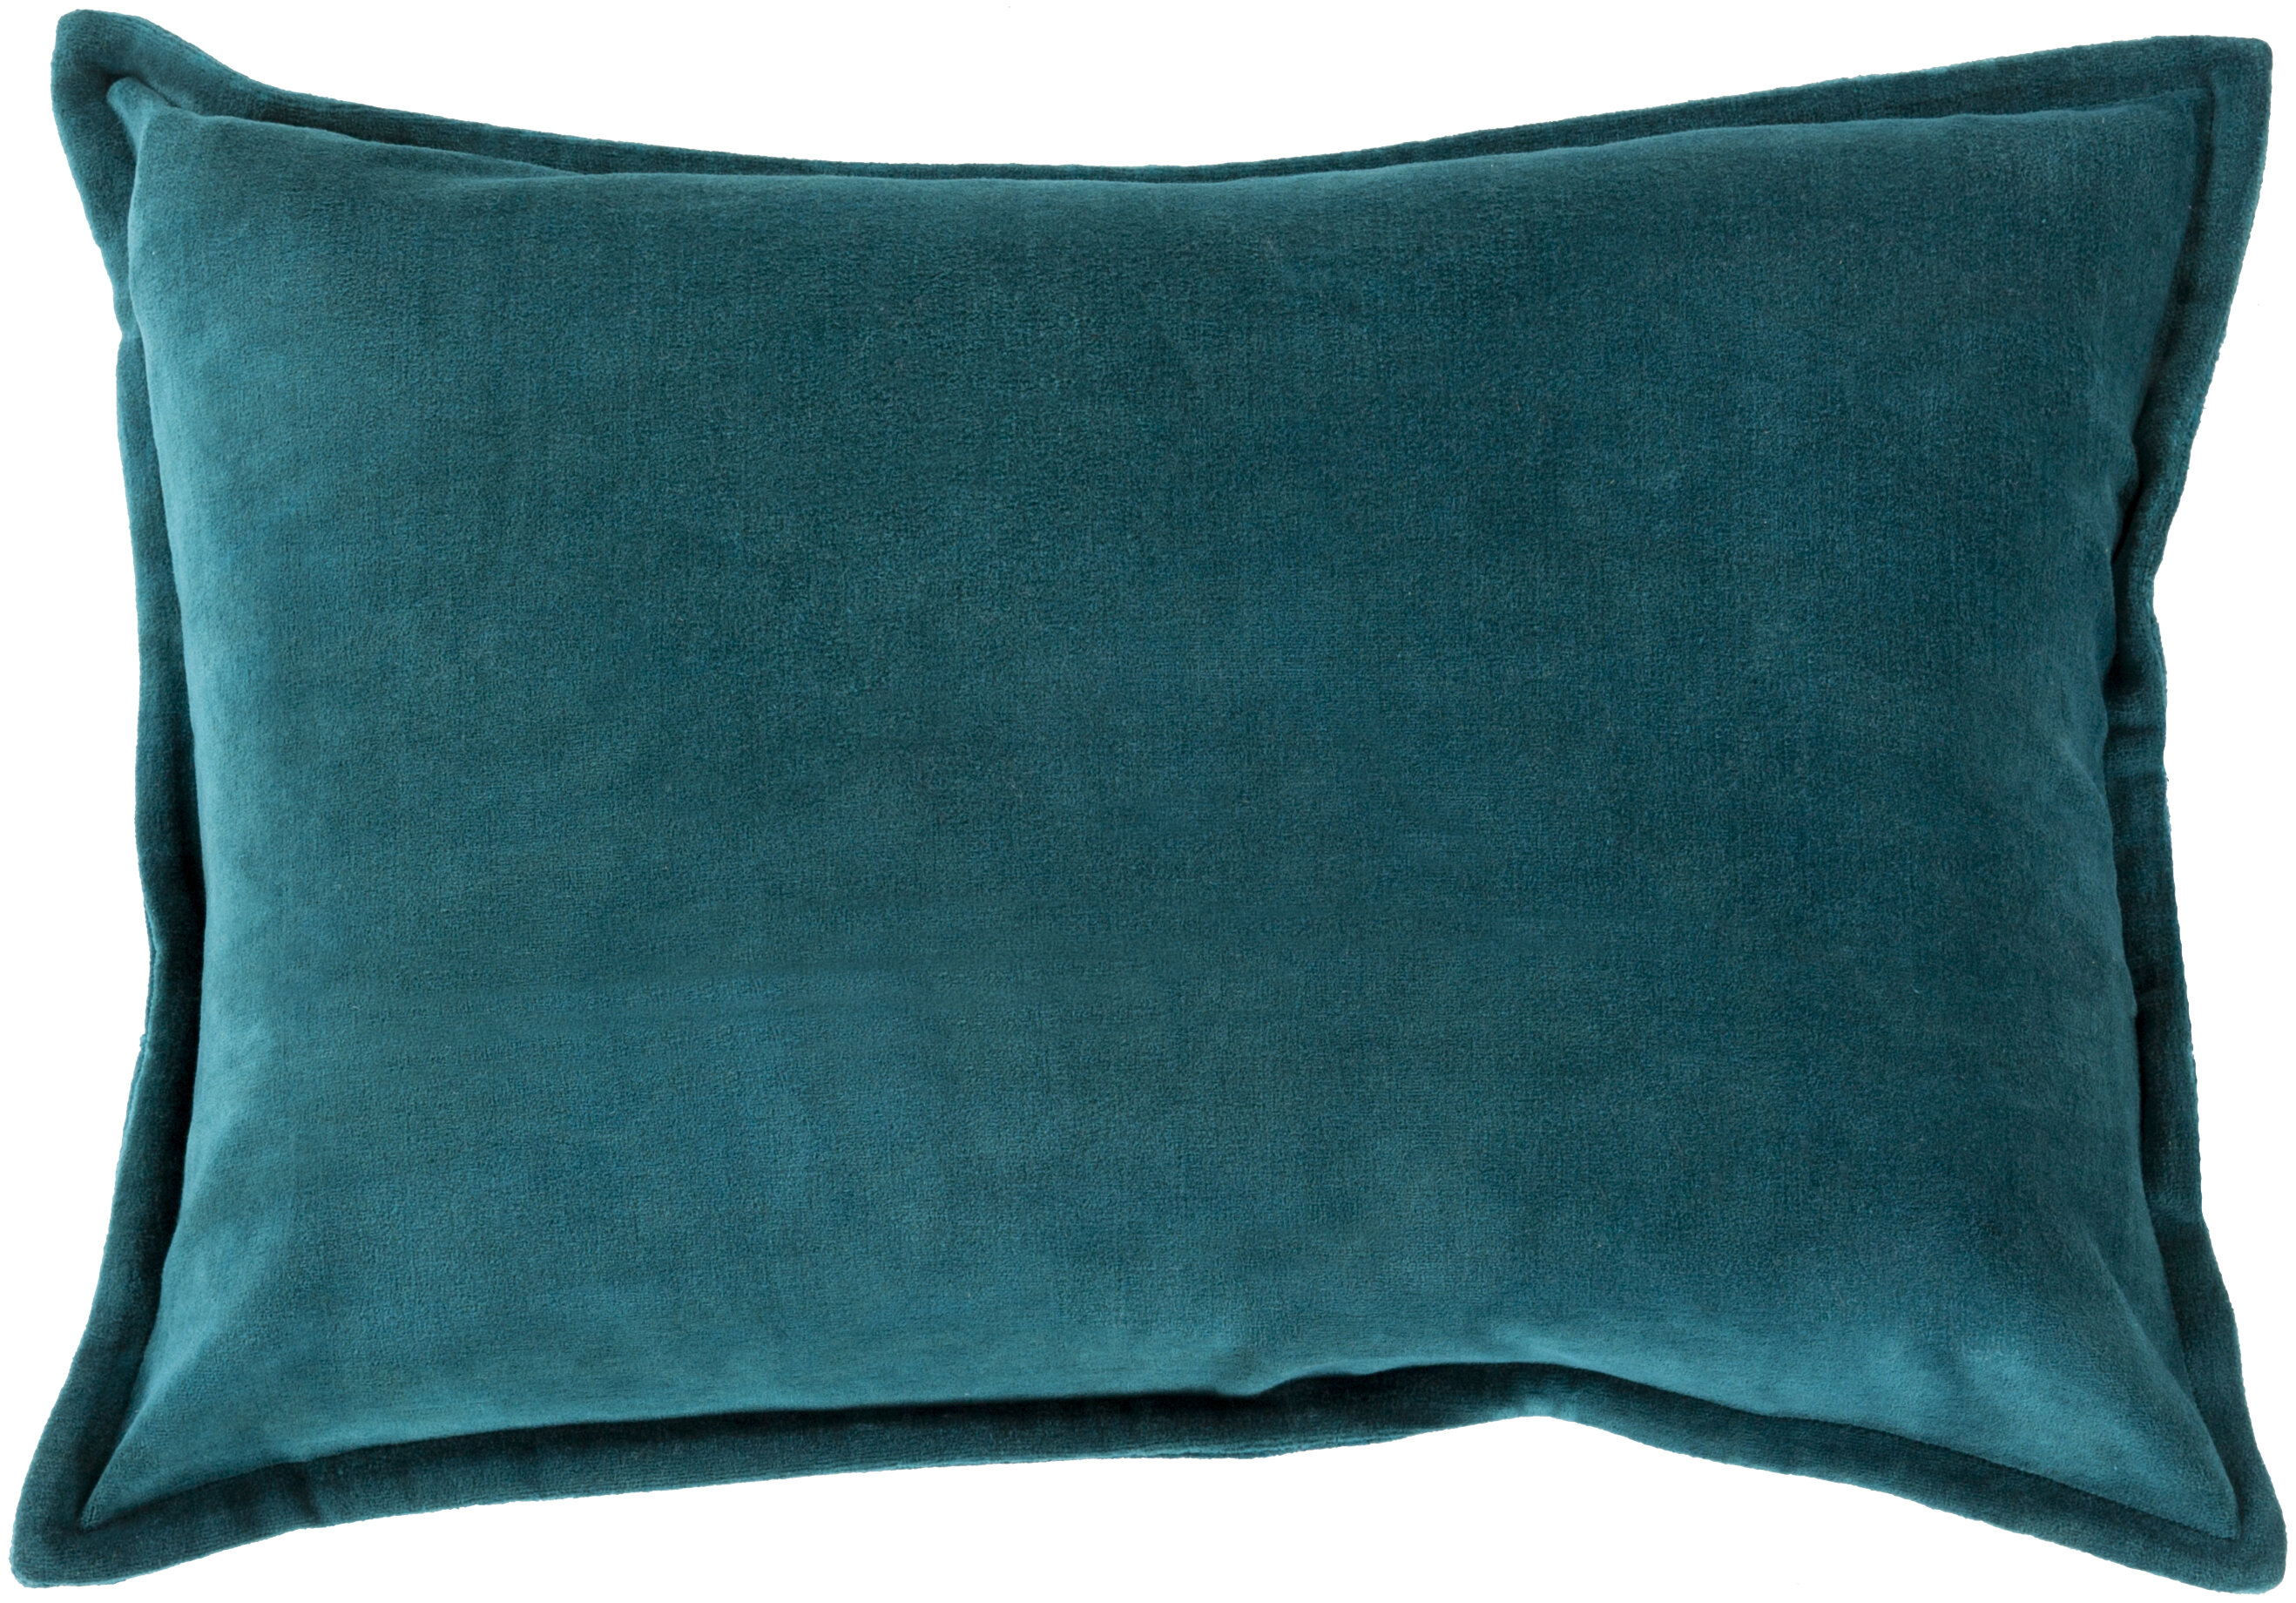 Teal Throw Pillows You'll Love in 2020 